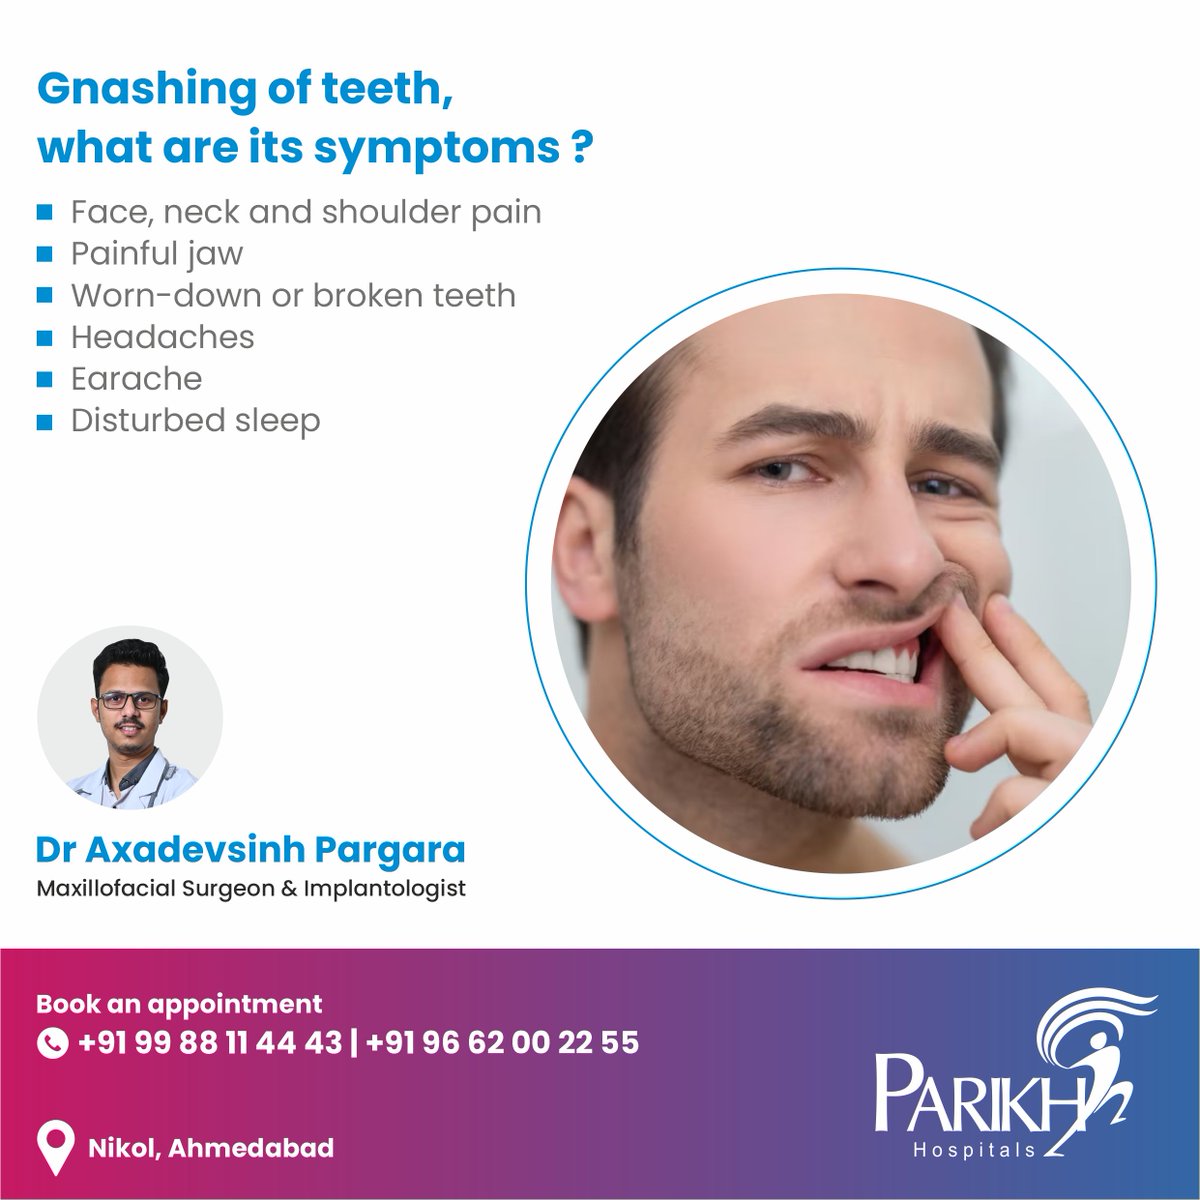 Our medical experts at Parikh Hospitals, Nikol can help you get answers to all your queries about diagnosis & treatment, so that you can make an informed decision. #ParikhHospitals #nikol #Stress #dentalcare #dental #dentistry #teeth #grinding #gnashing #sleepproblem #snoring